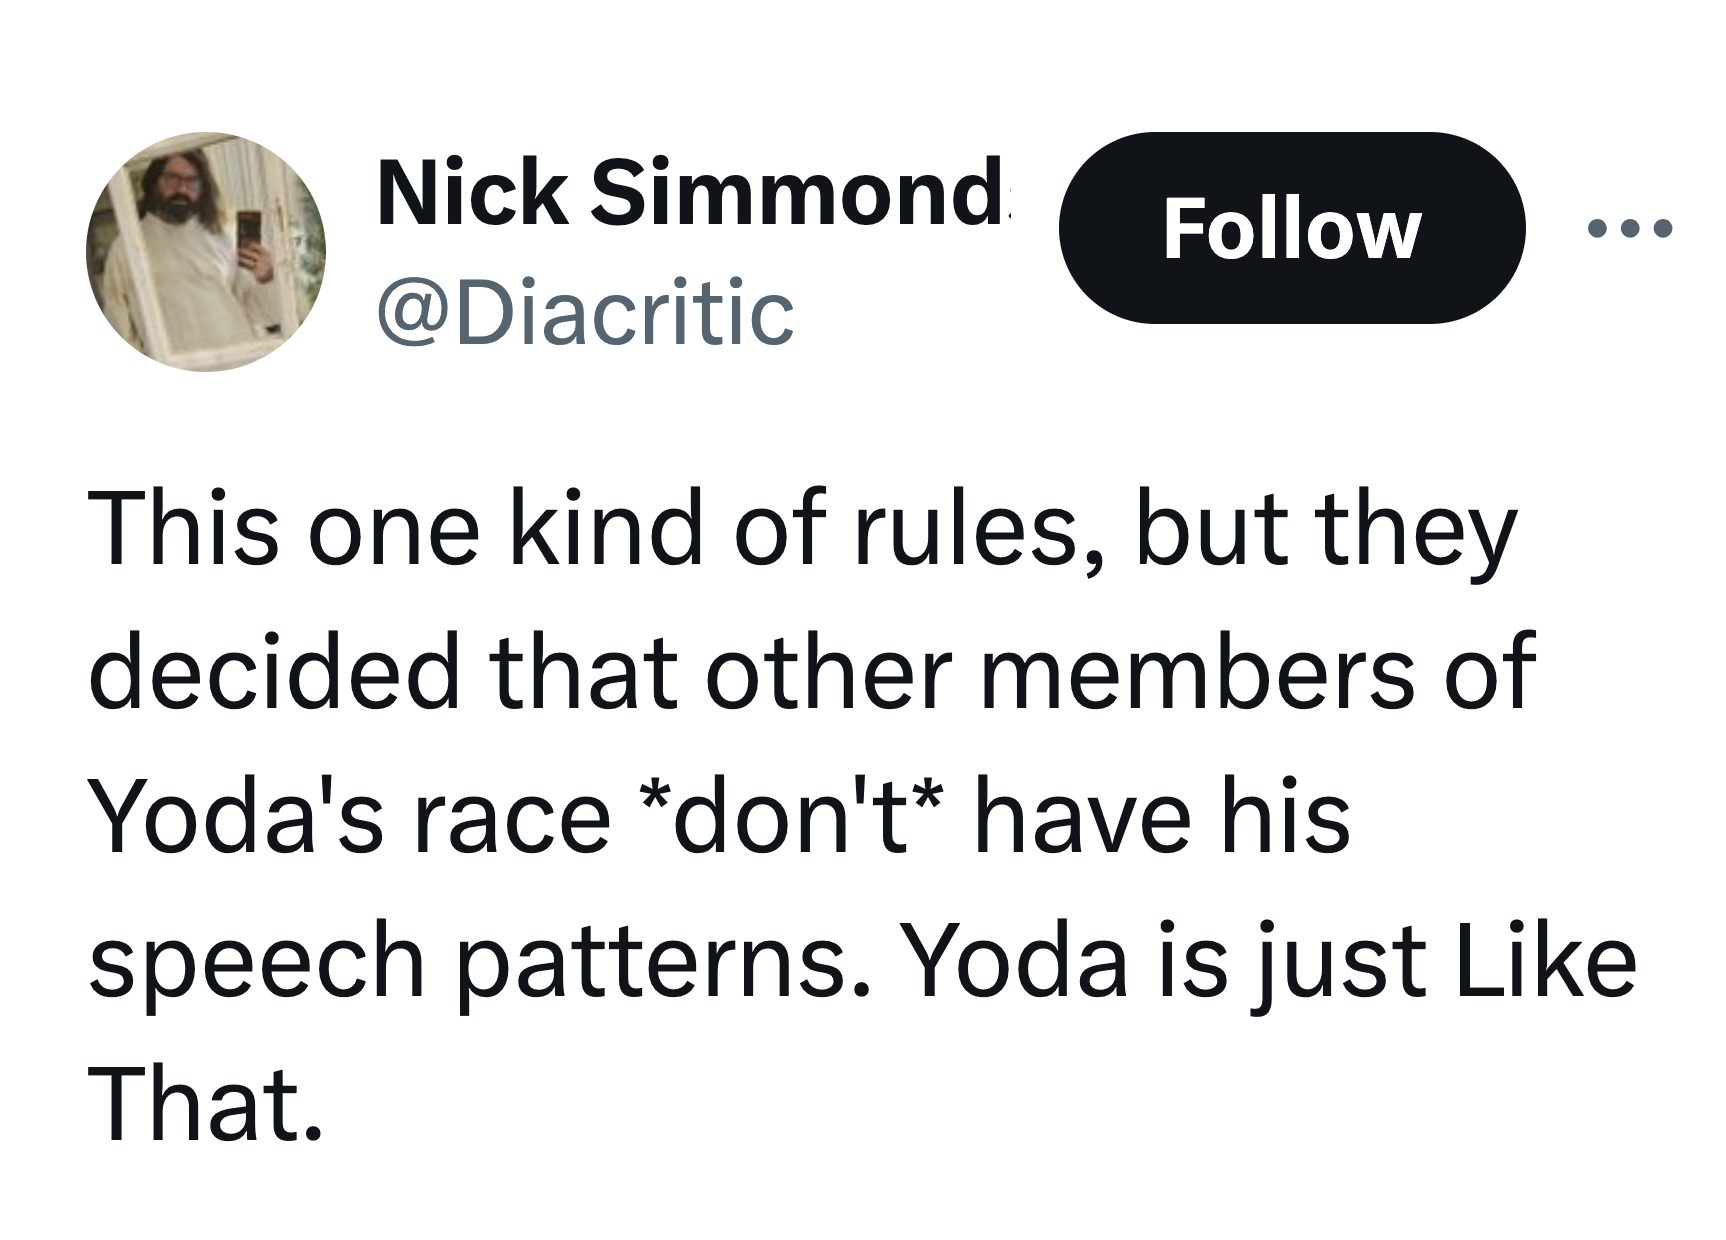 circle - Nick Simmond This one kind of rules, but they decided that other members of Yoda's race don't have his speech patterns. Yoda is just That.